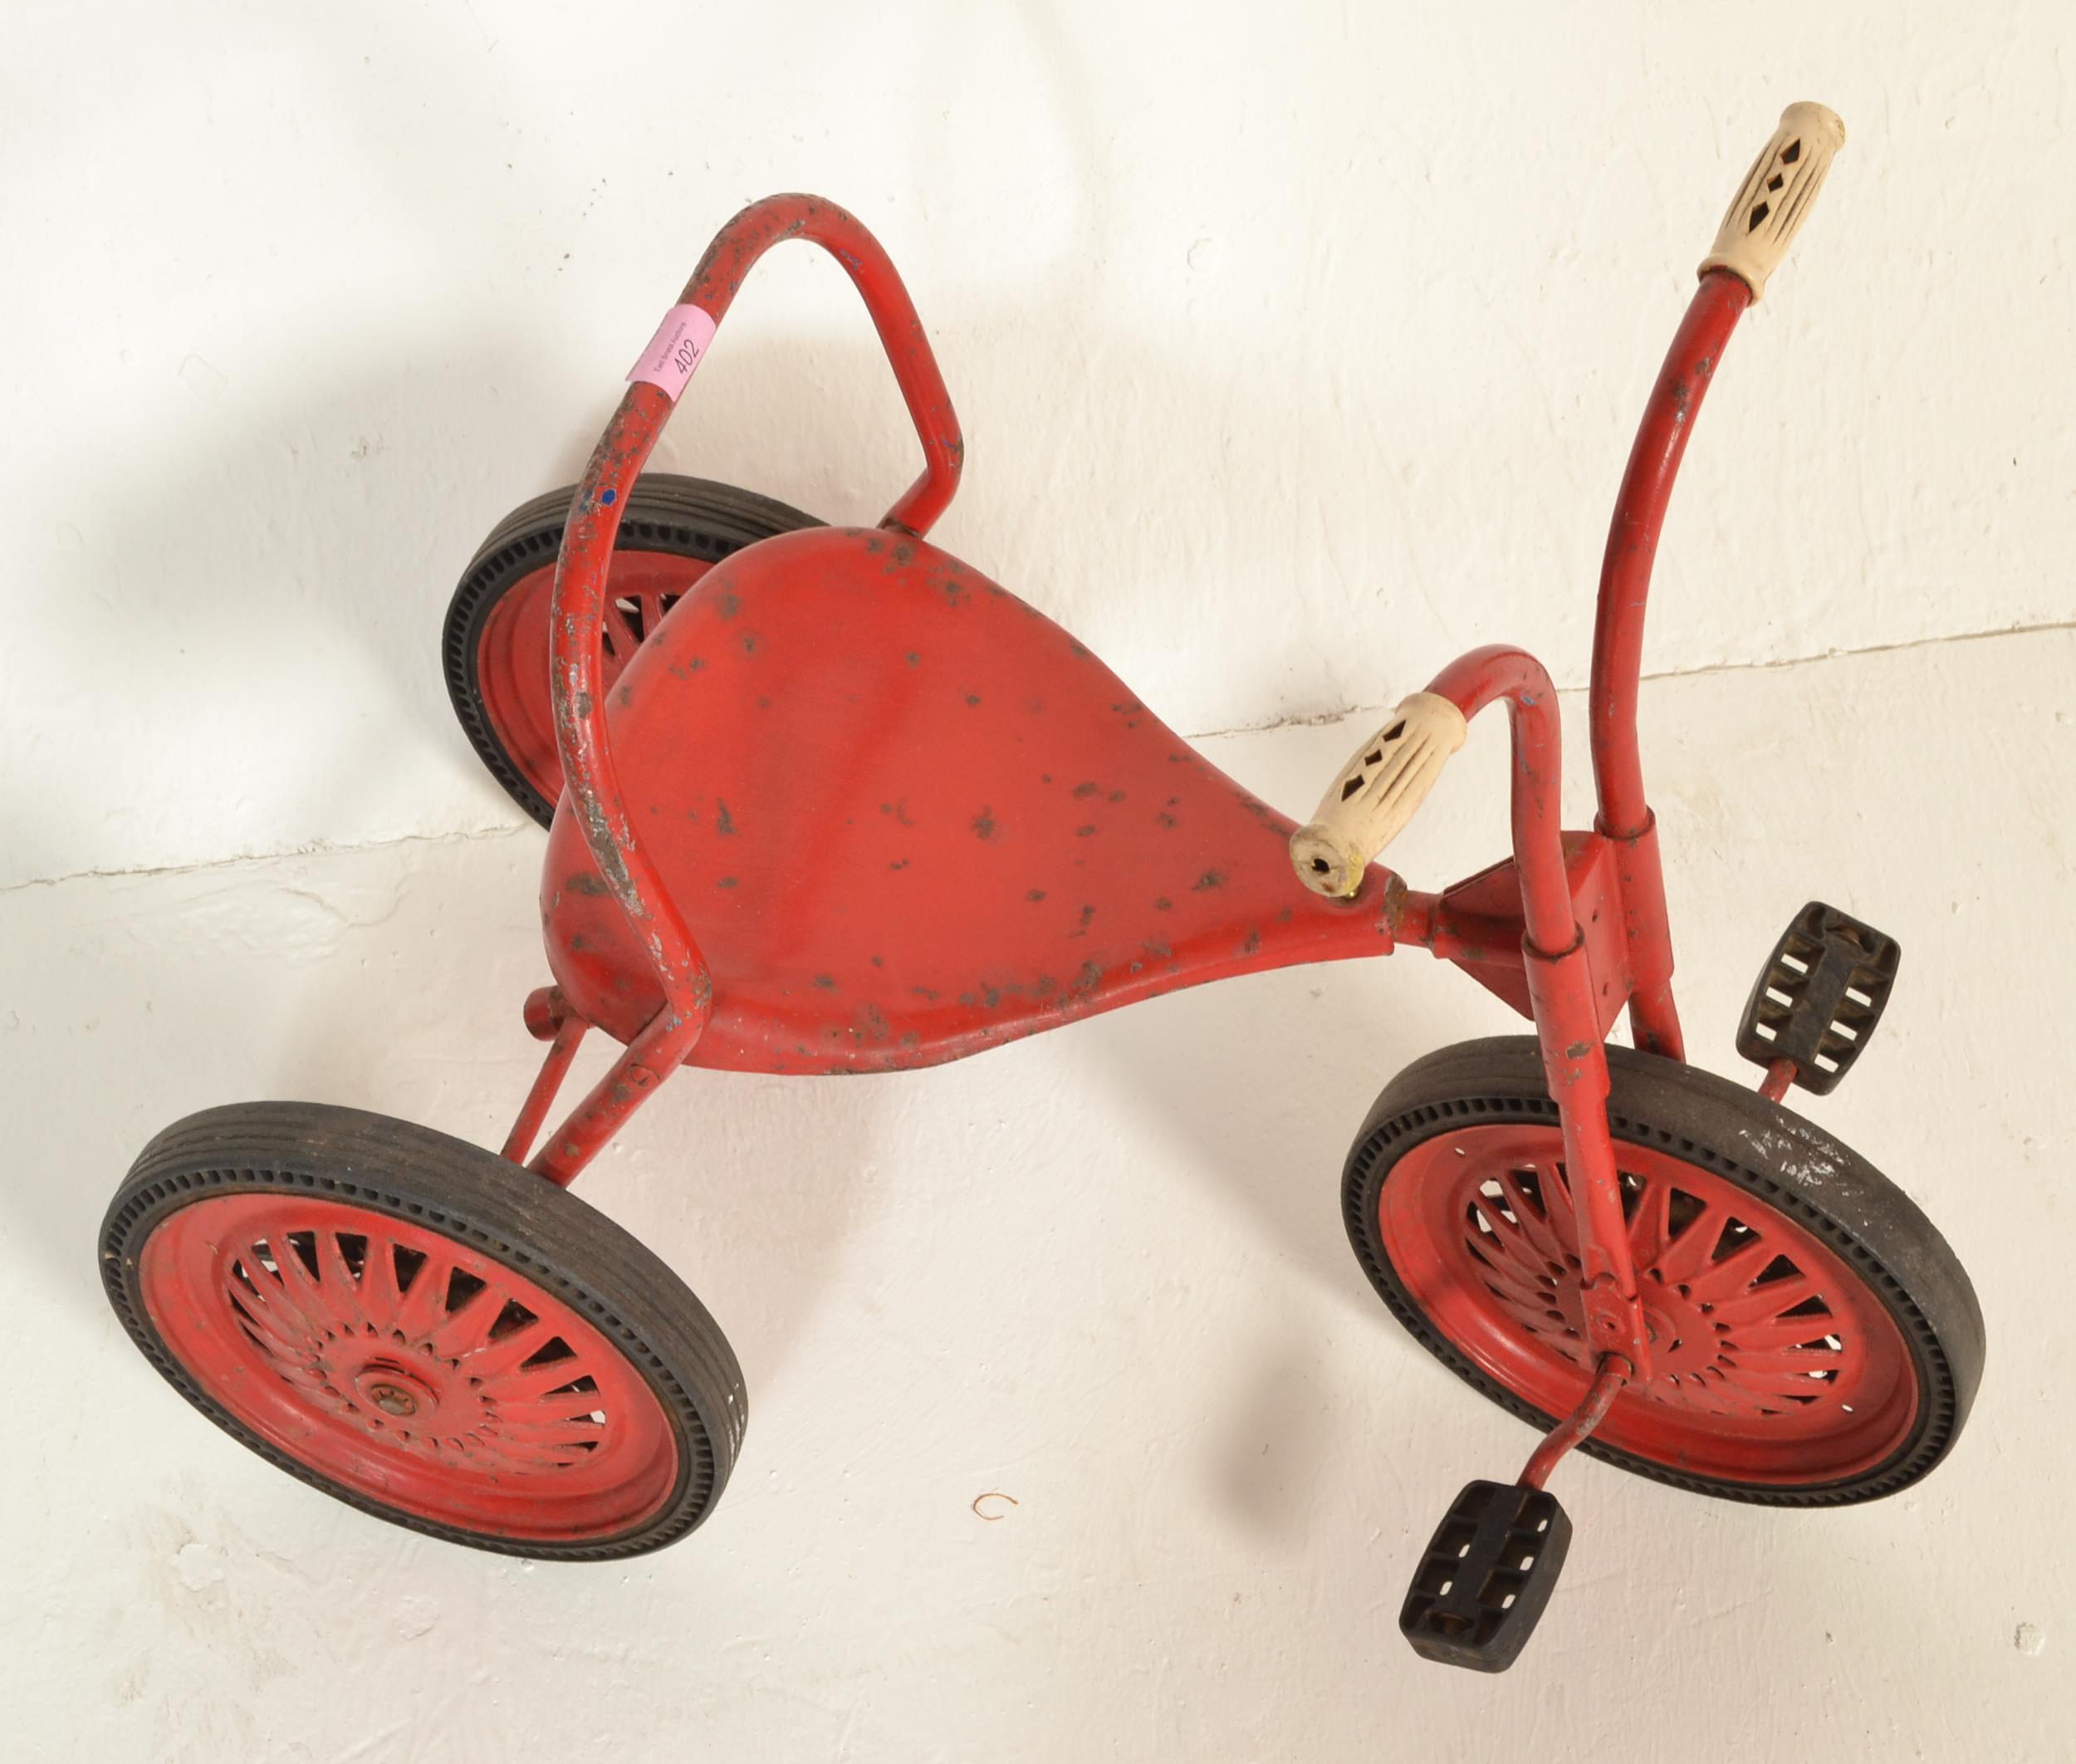 A VINTAGE TRI-ANG RIDE ALONG CHILD'S TRIKE WITH SOLID RUBBER TYRES - Image 2 of 5